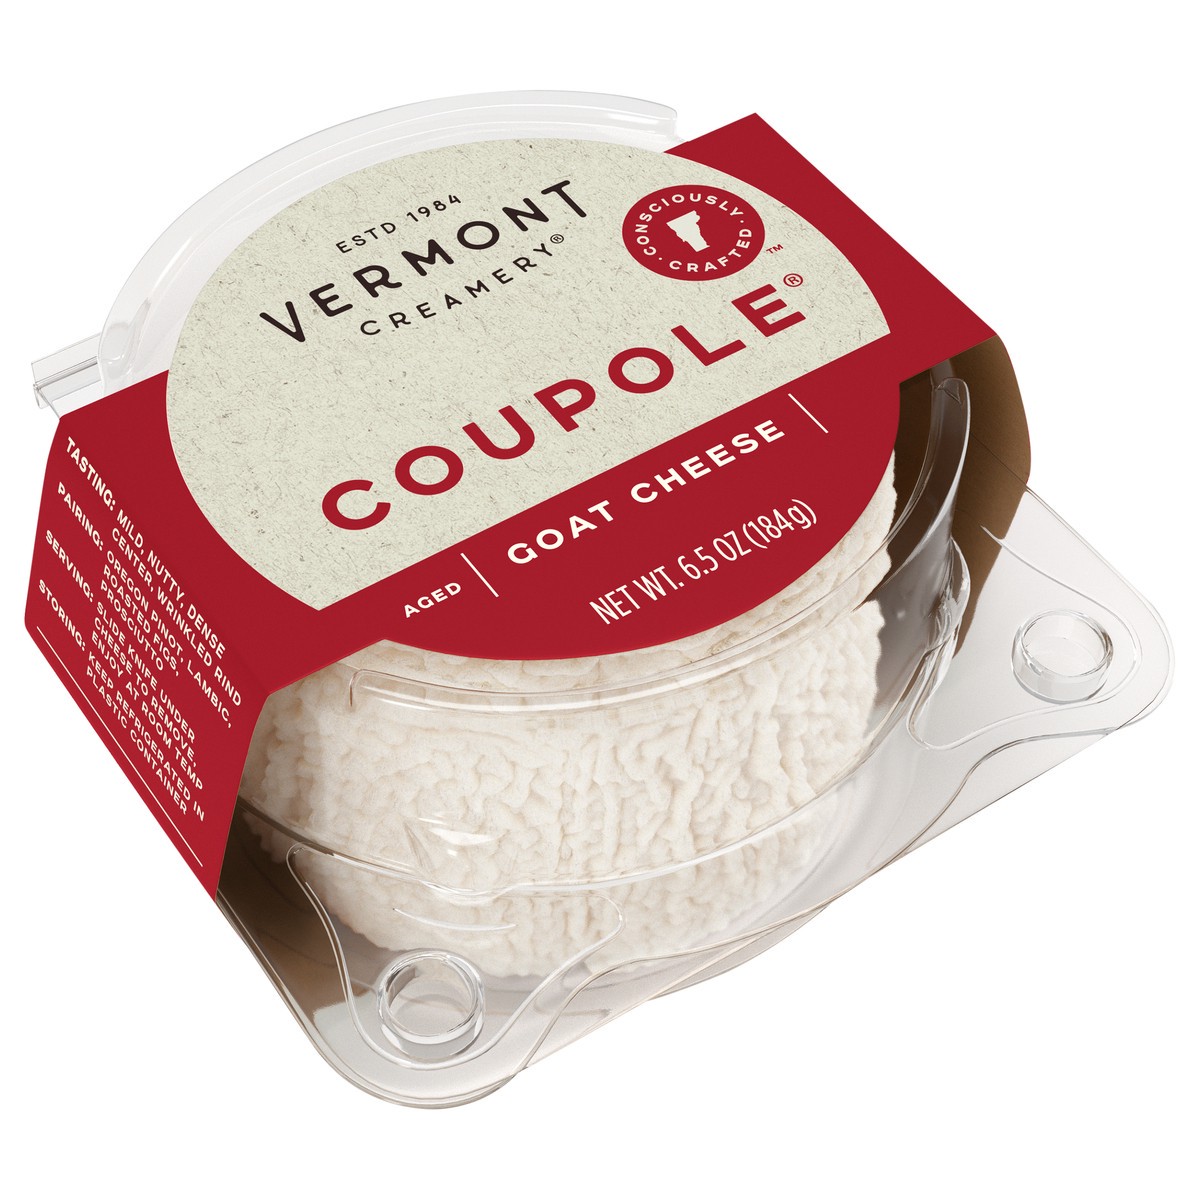 slide 9 of 14, Vermont Creamery Coupole Goat Cheese 6.5 oz. Pack, 6.5 oz